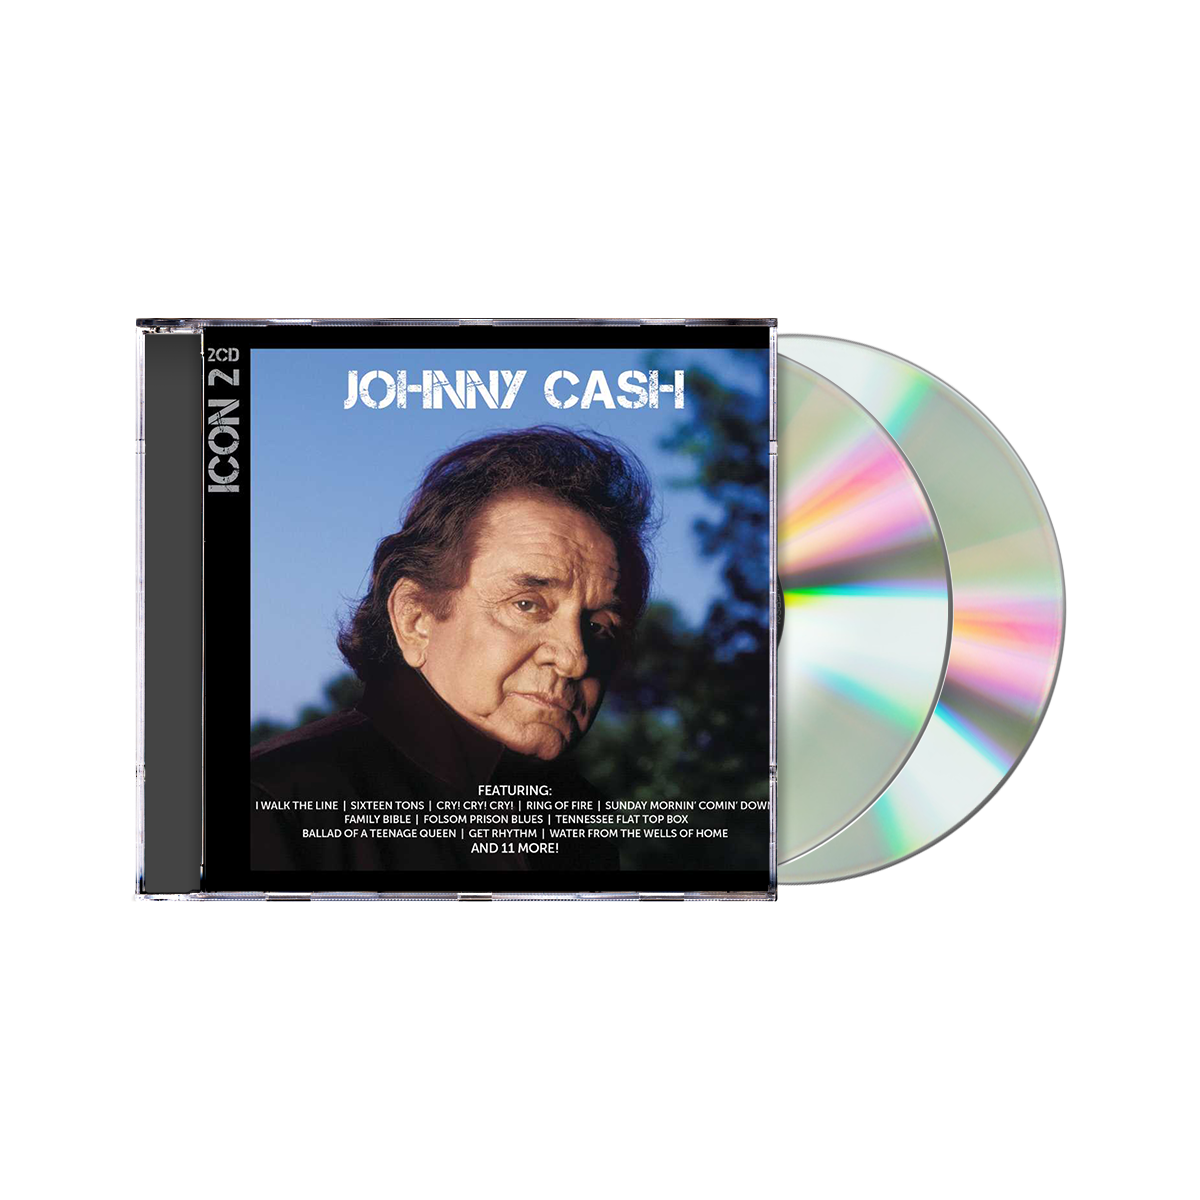 Johnny Cash - ICON 2 CD – uDiscover